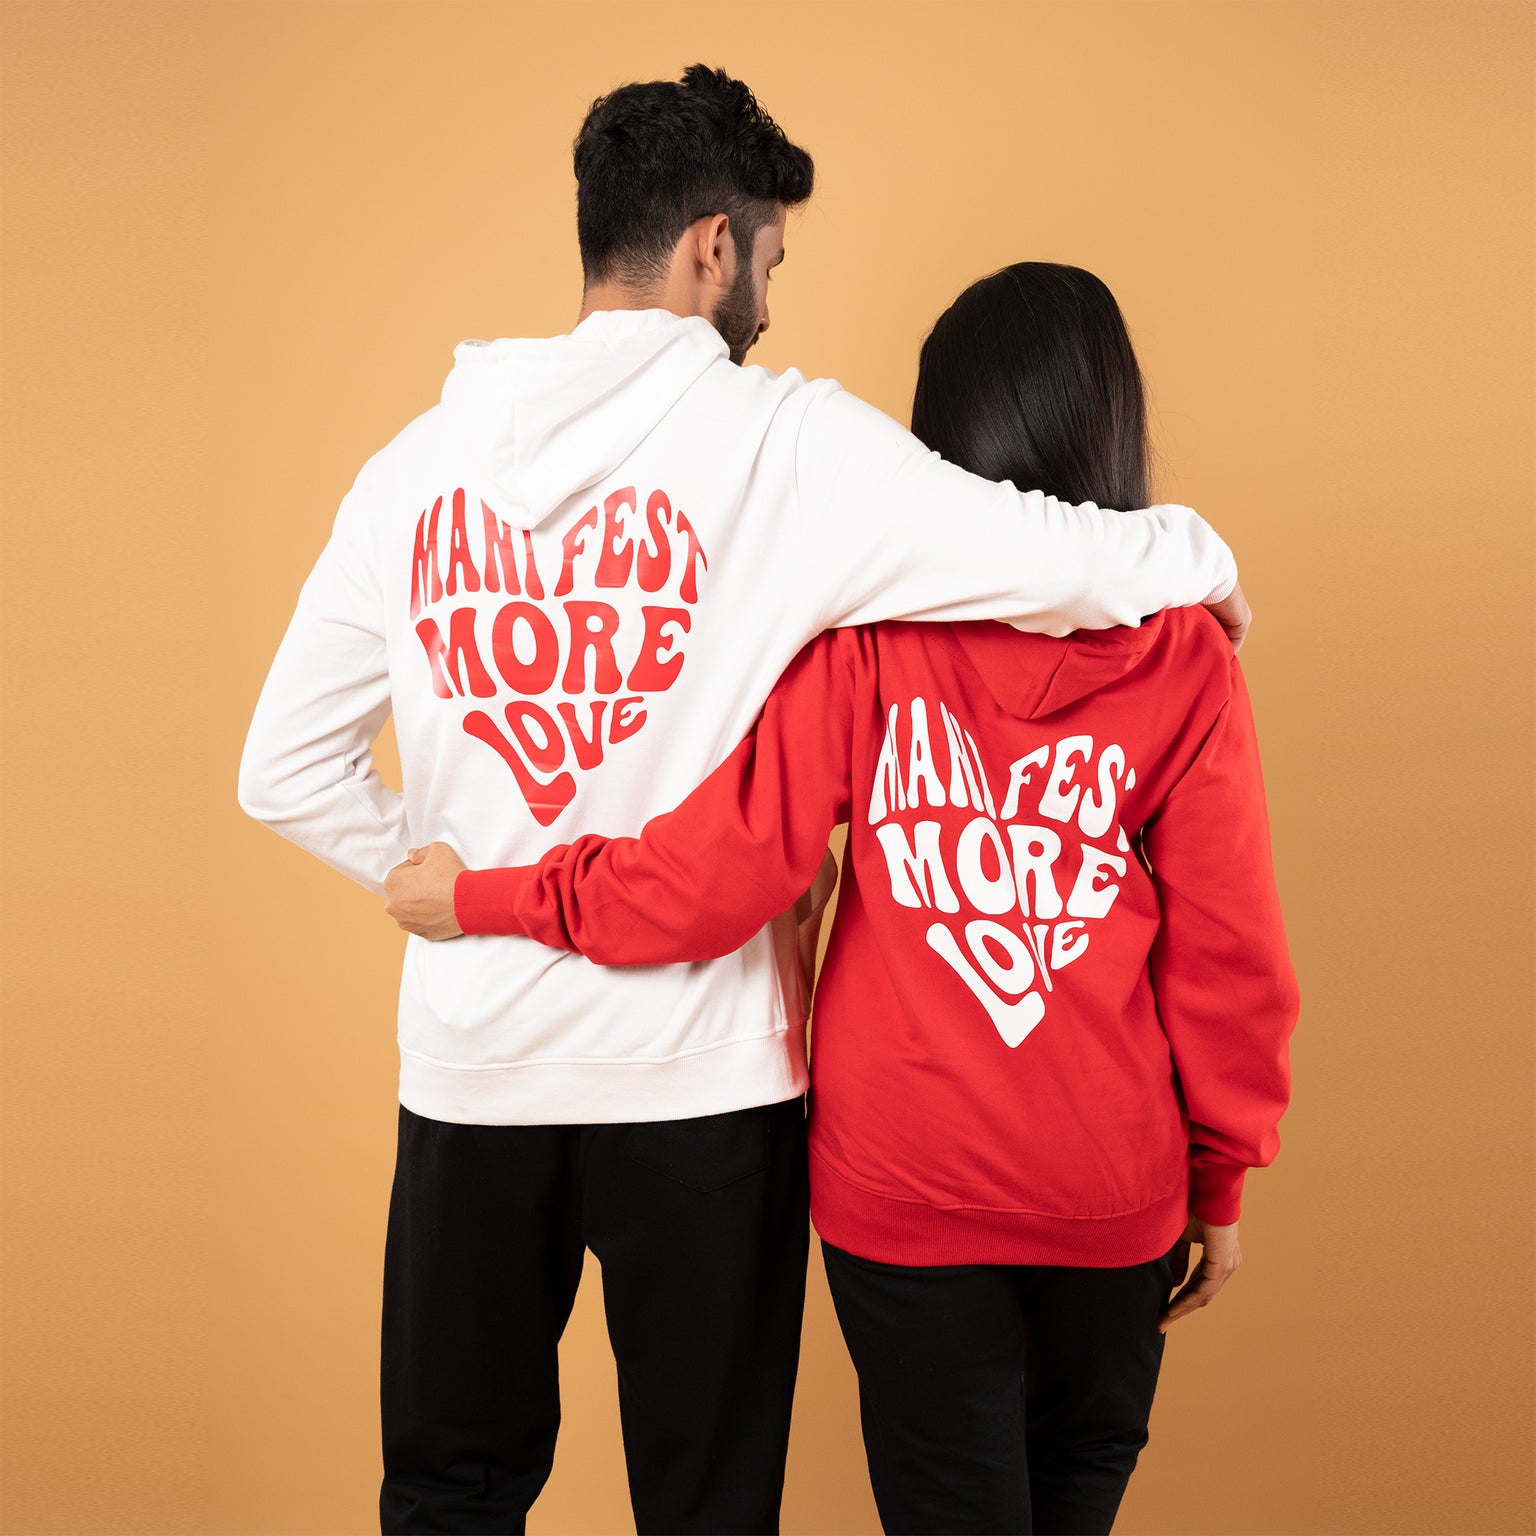 manifest-more-love-white-and-red-couple-hoodies-gogirgit-com